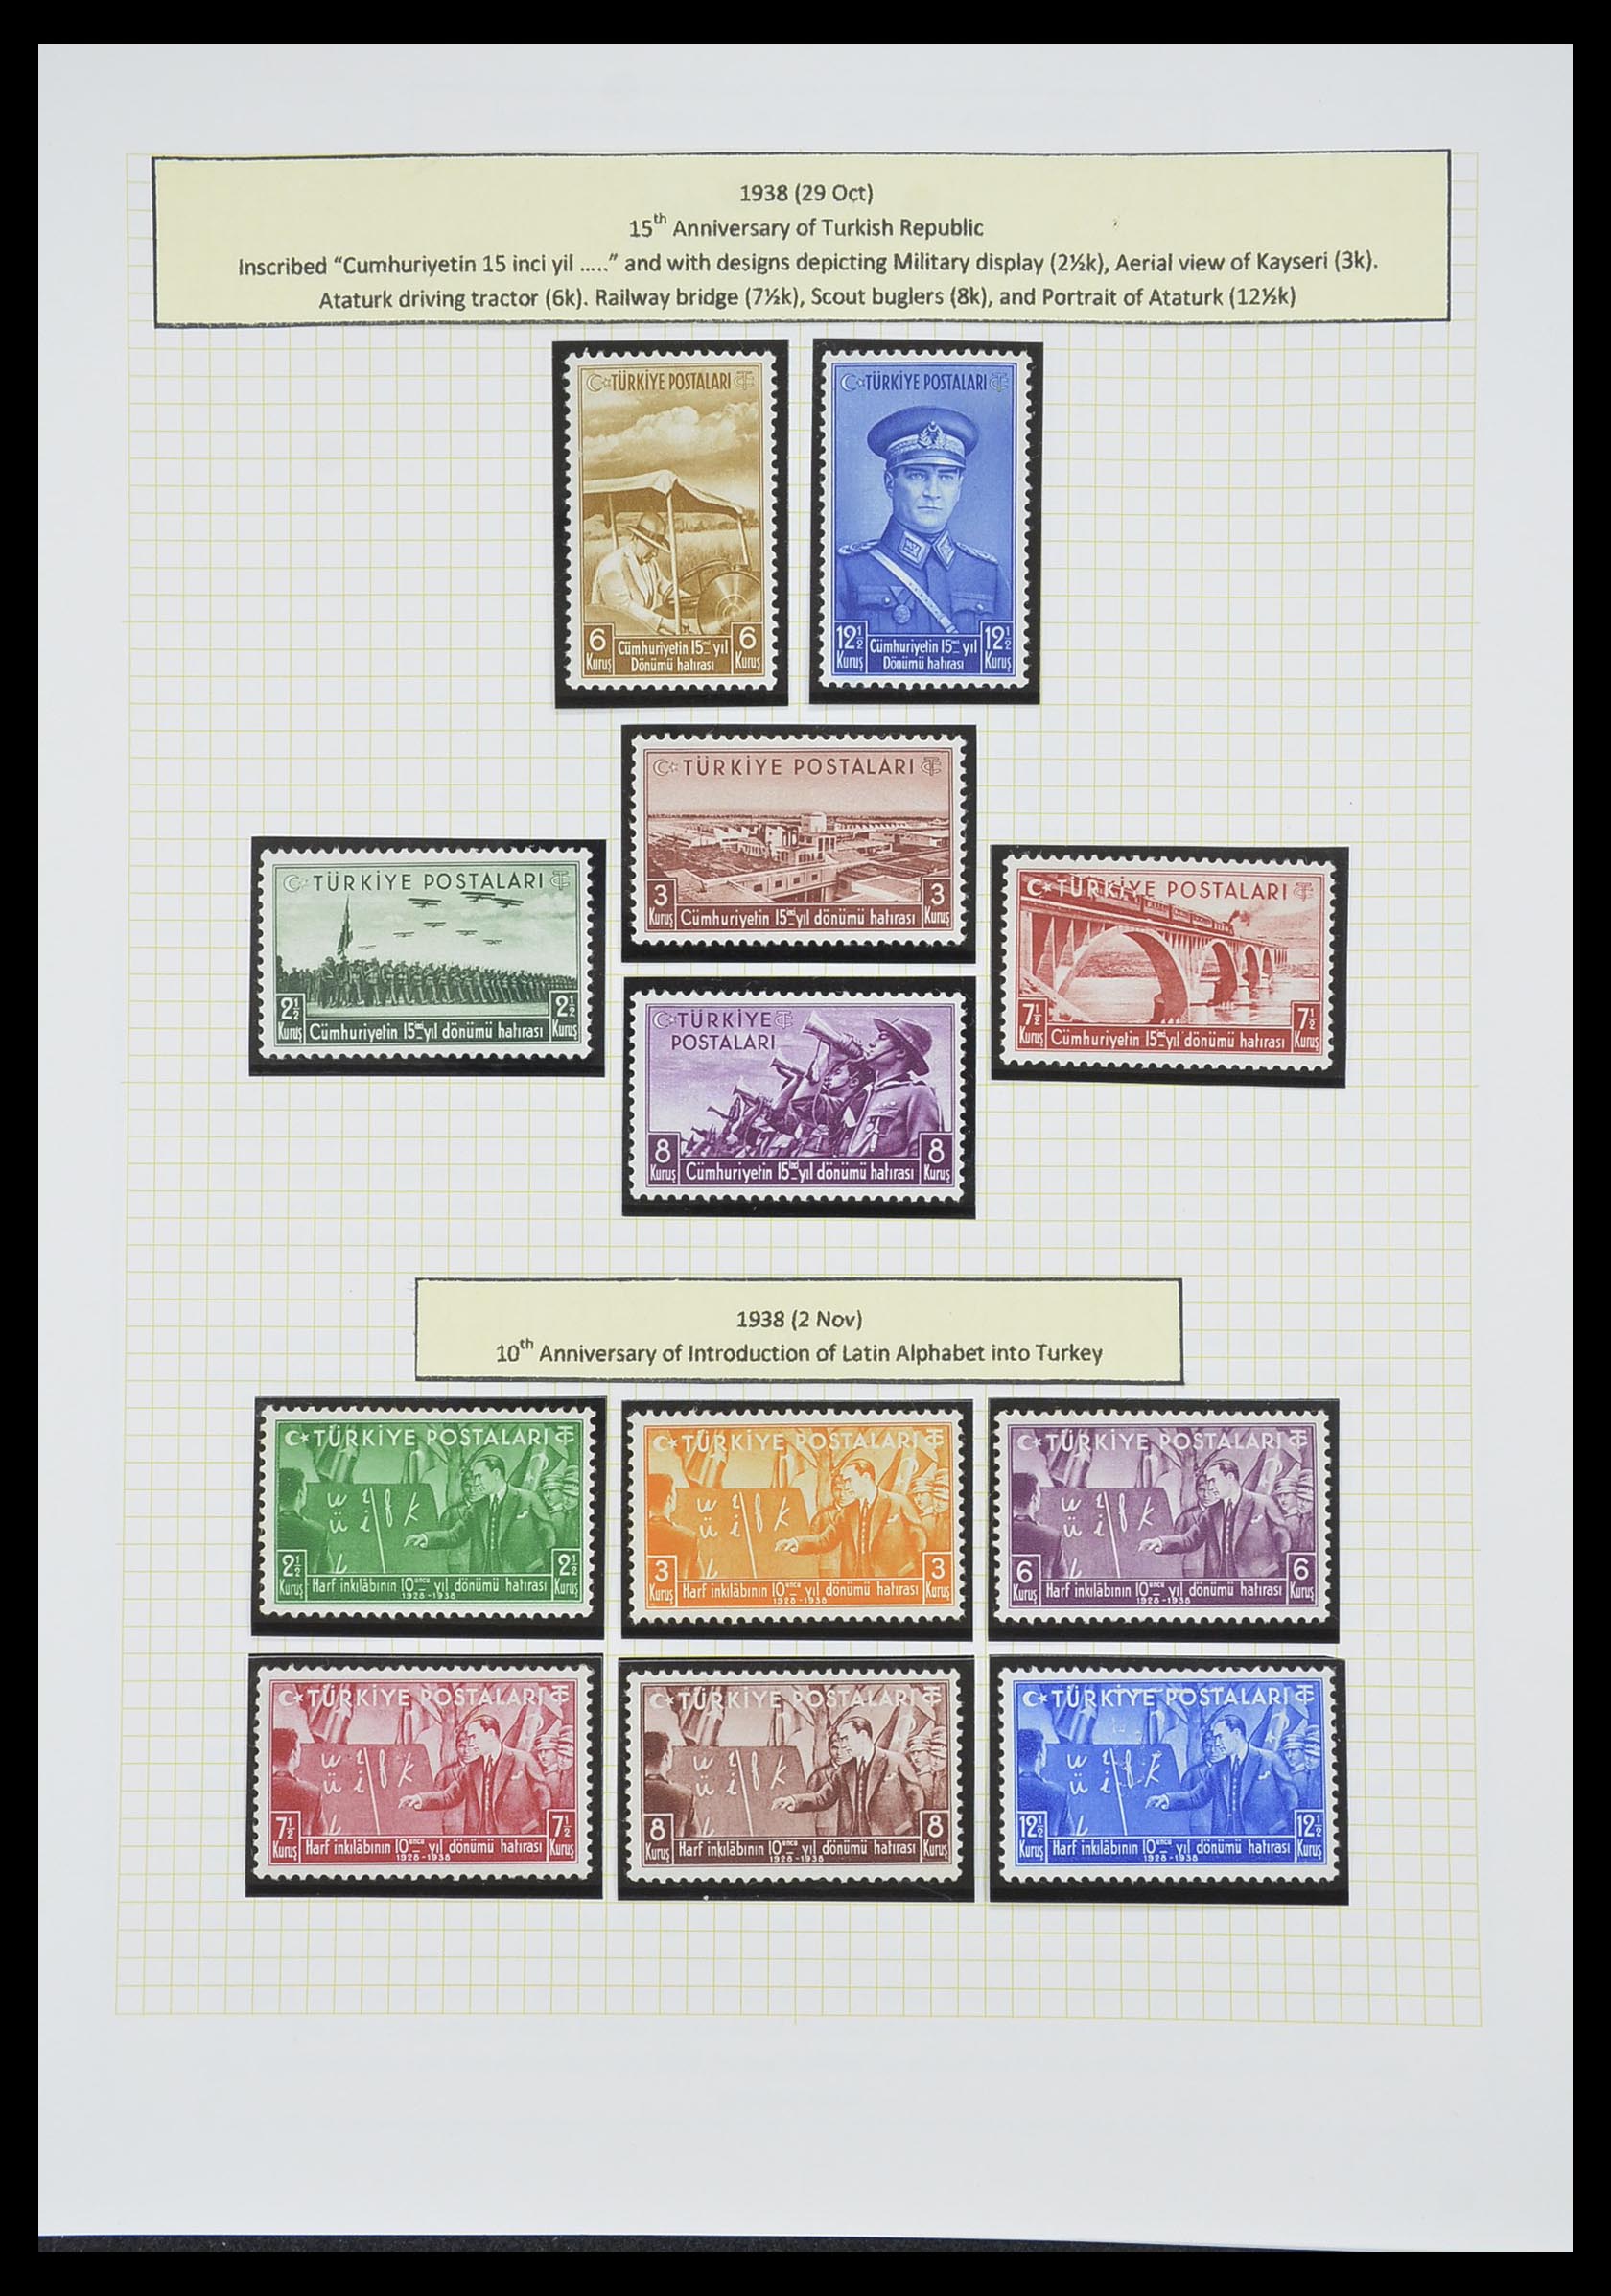 33398 072 - Stamp collection 33398 Turkey and territories 1863-1958.